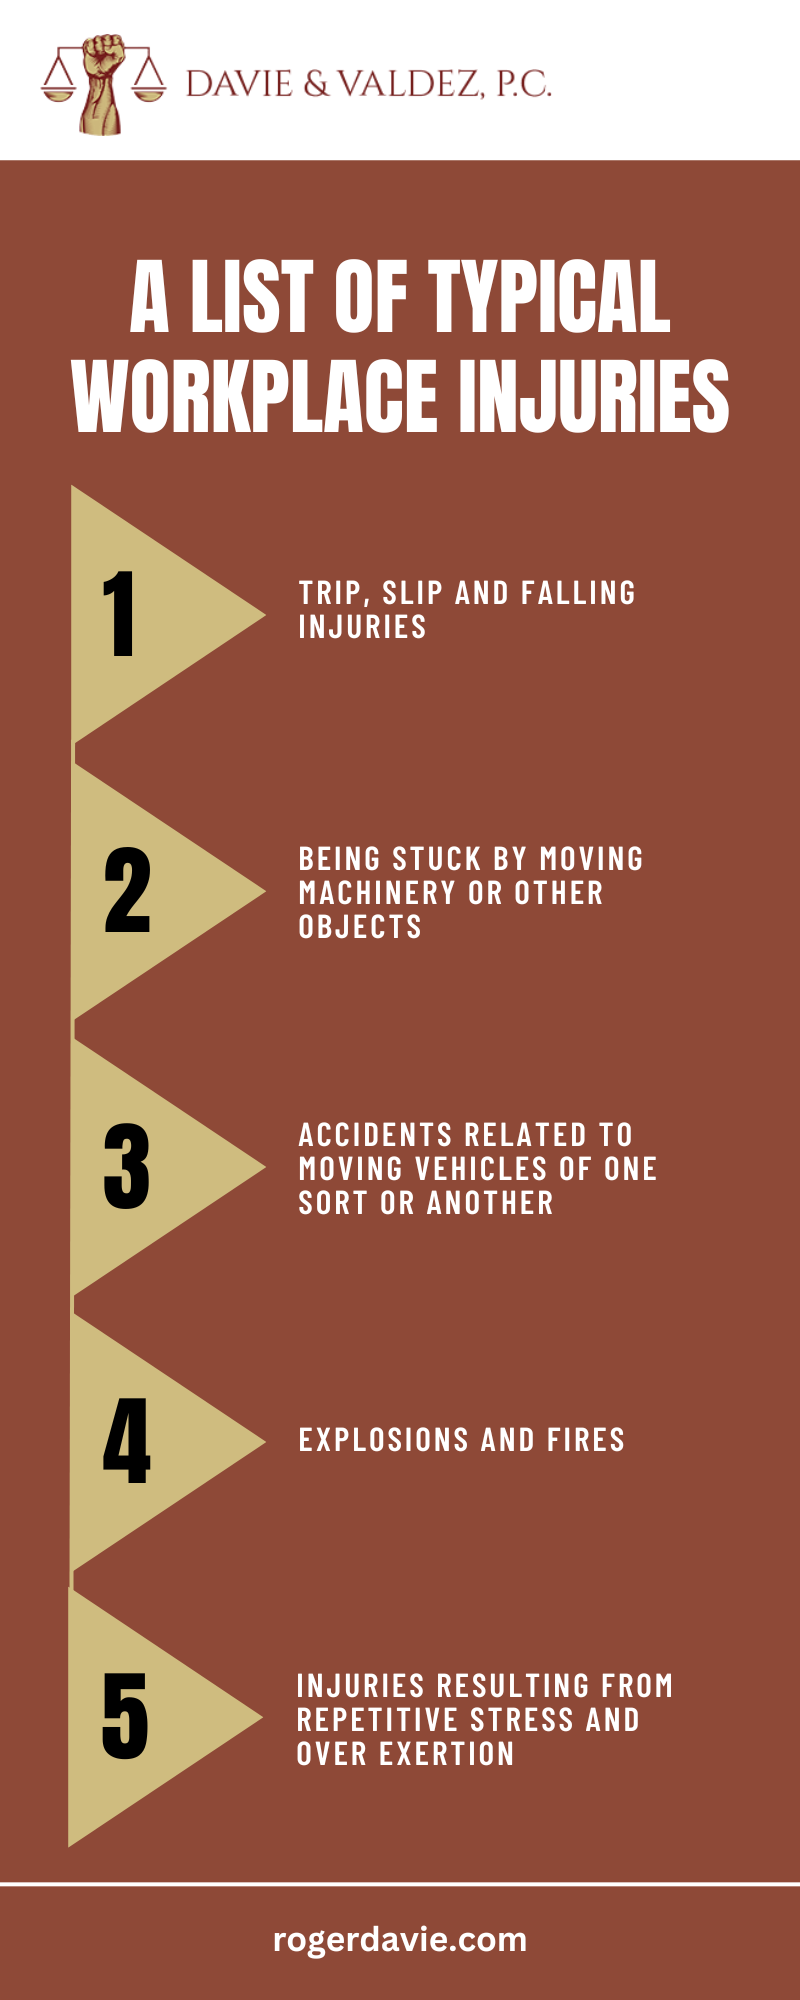 A LIST OF TYPICAL WORKPLACE INJURIES INFOGRAPHIC